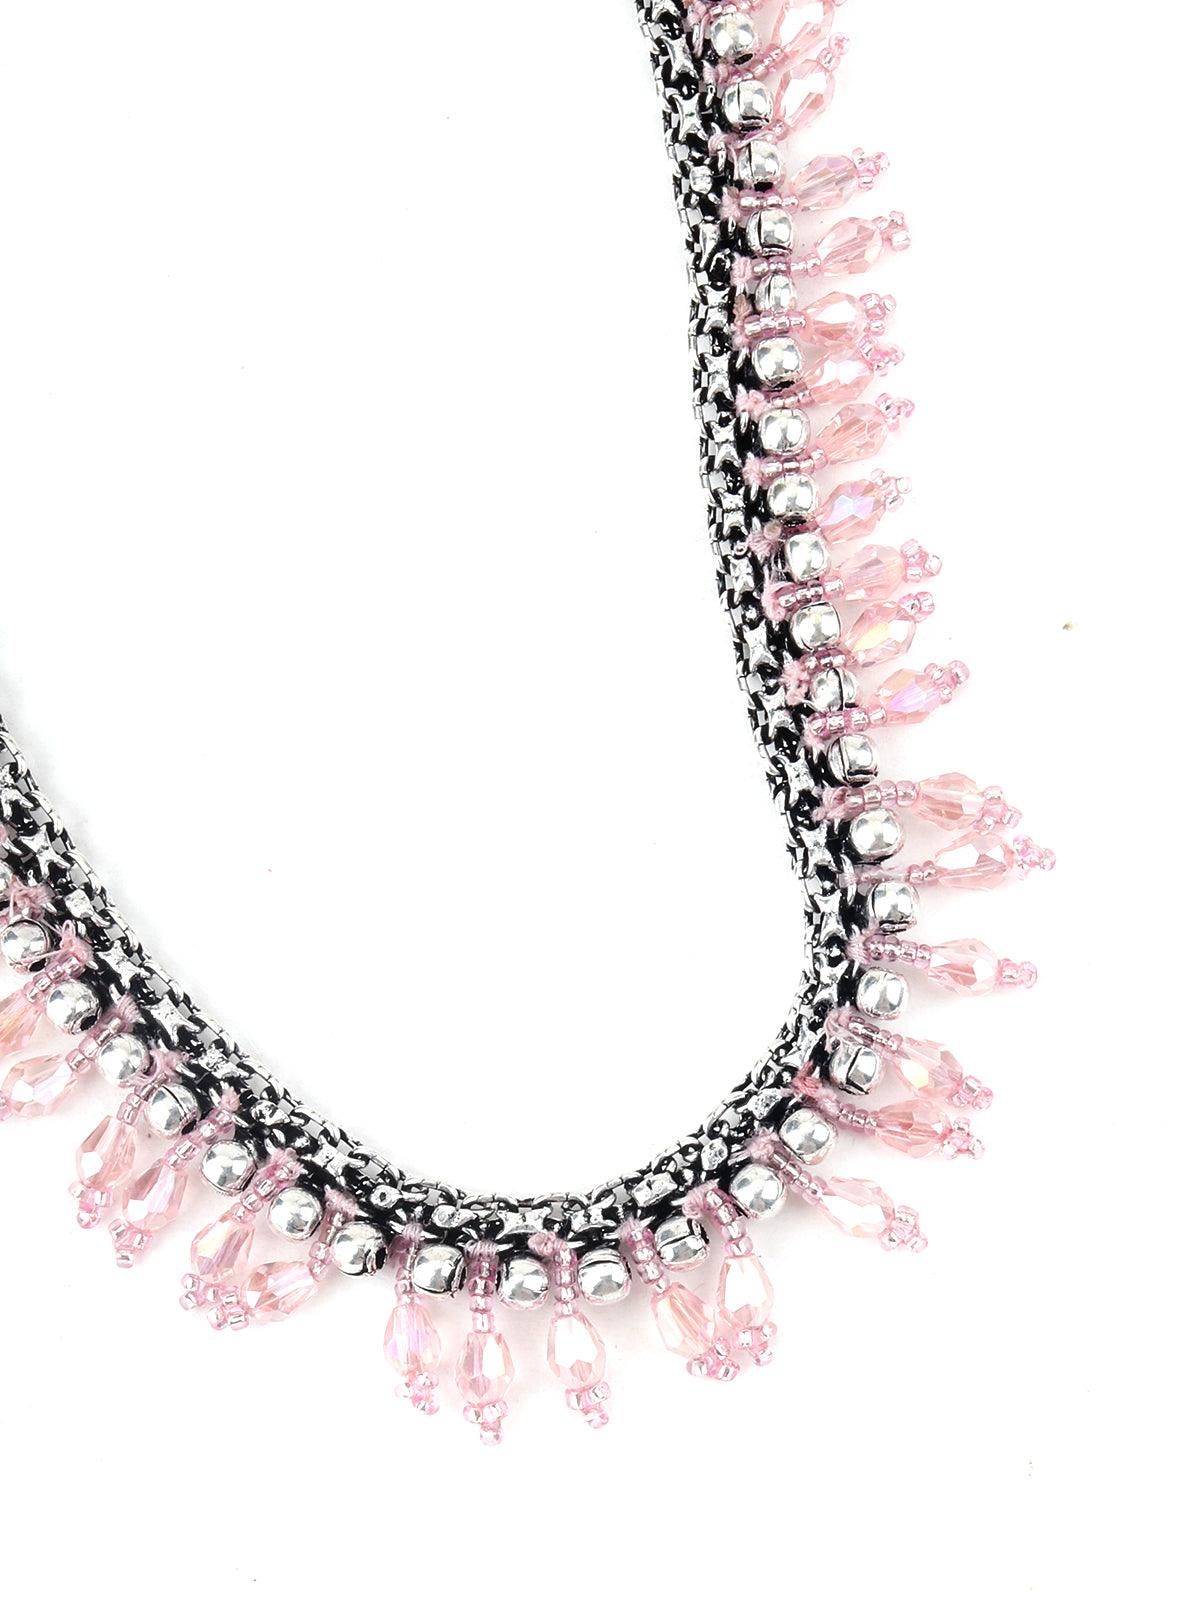 Oxidized Silver and Pink Rhinestones Necklace - Odette